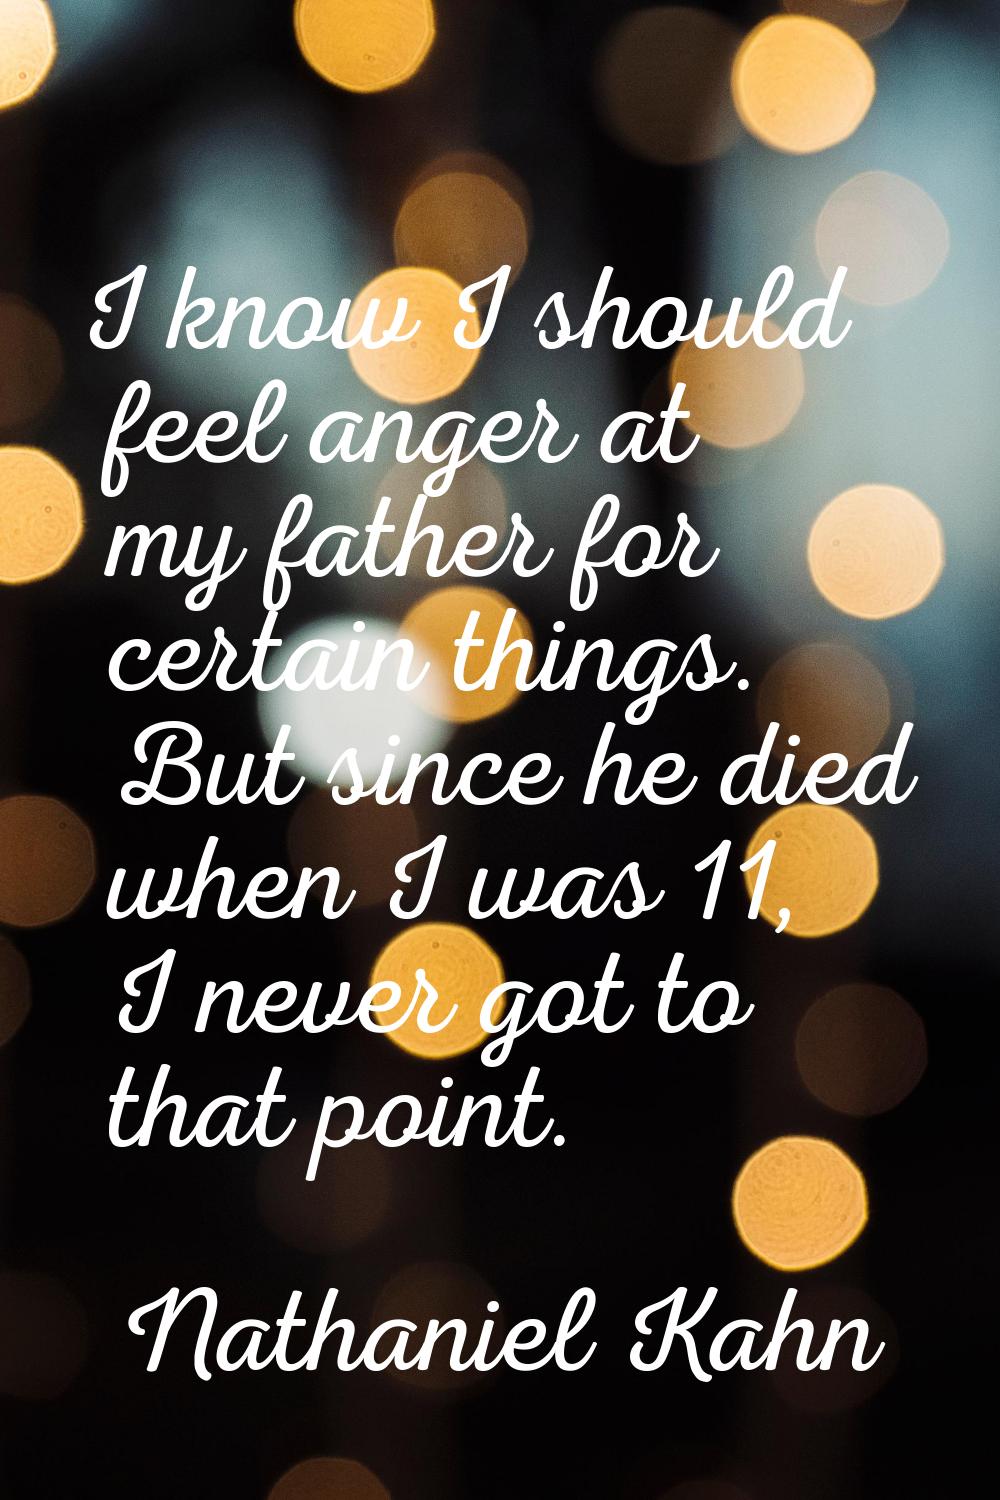 I know I should feel anger at my father for certain things. But since he died when I was 11, I neve